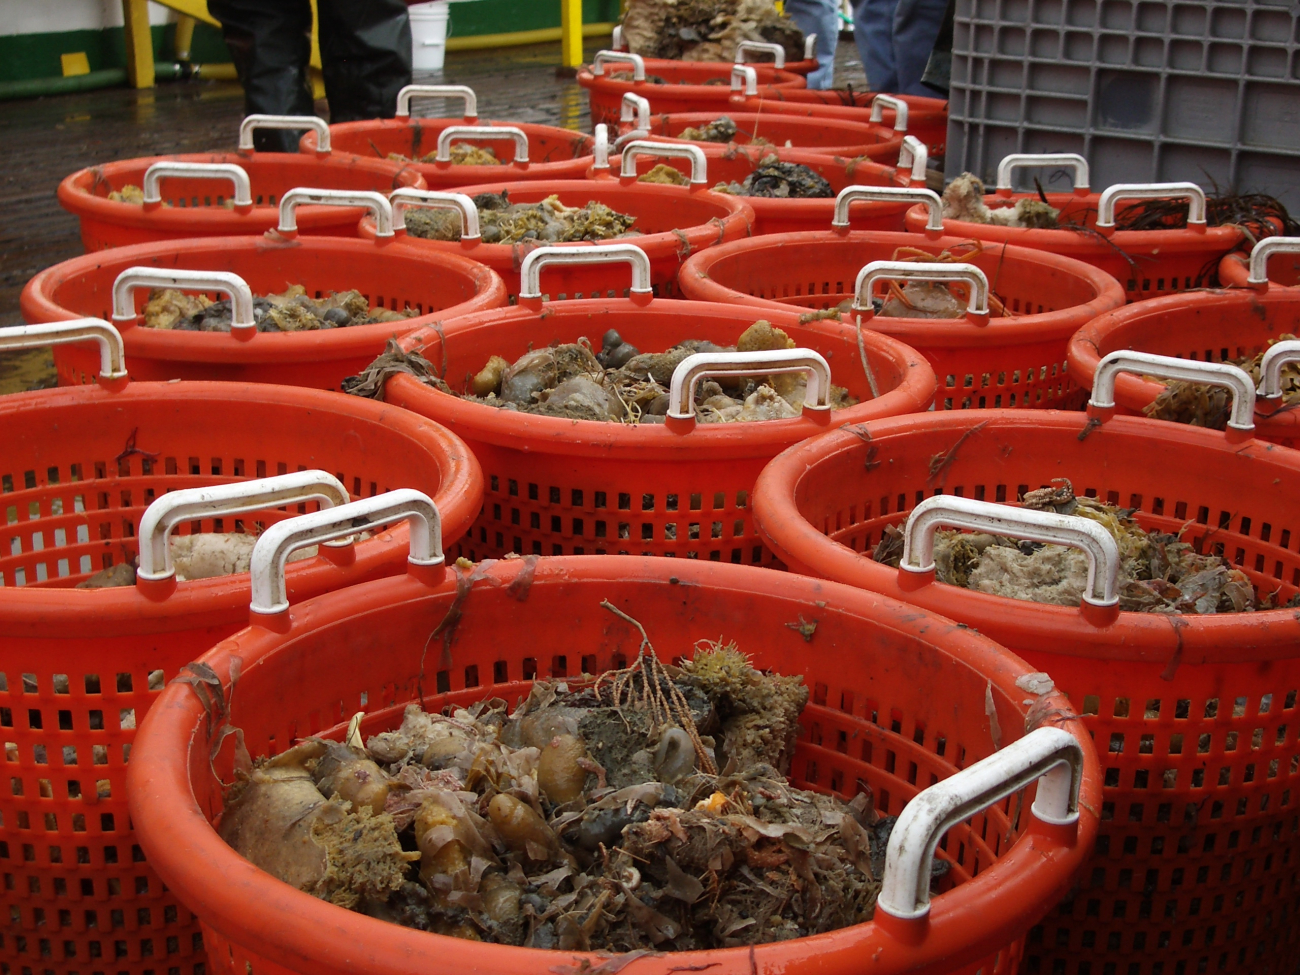 Benthic catch aboard the R/V Yuzhmorgeologiya, sorted into baskets for analysis